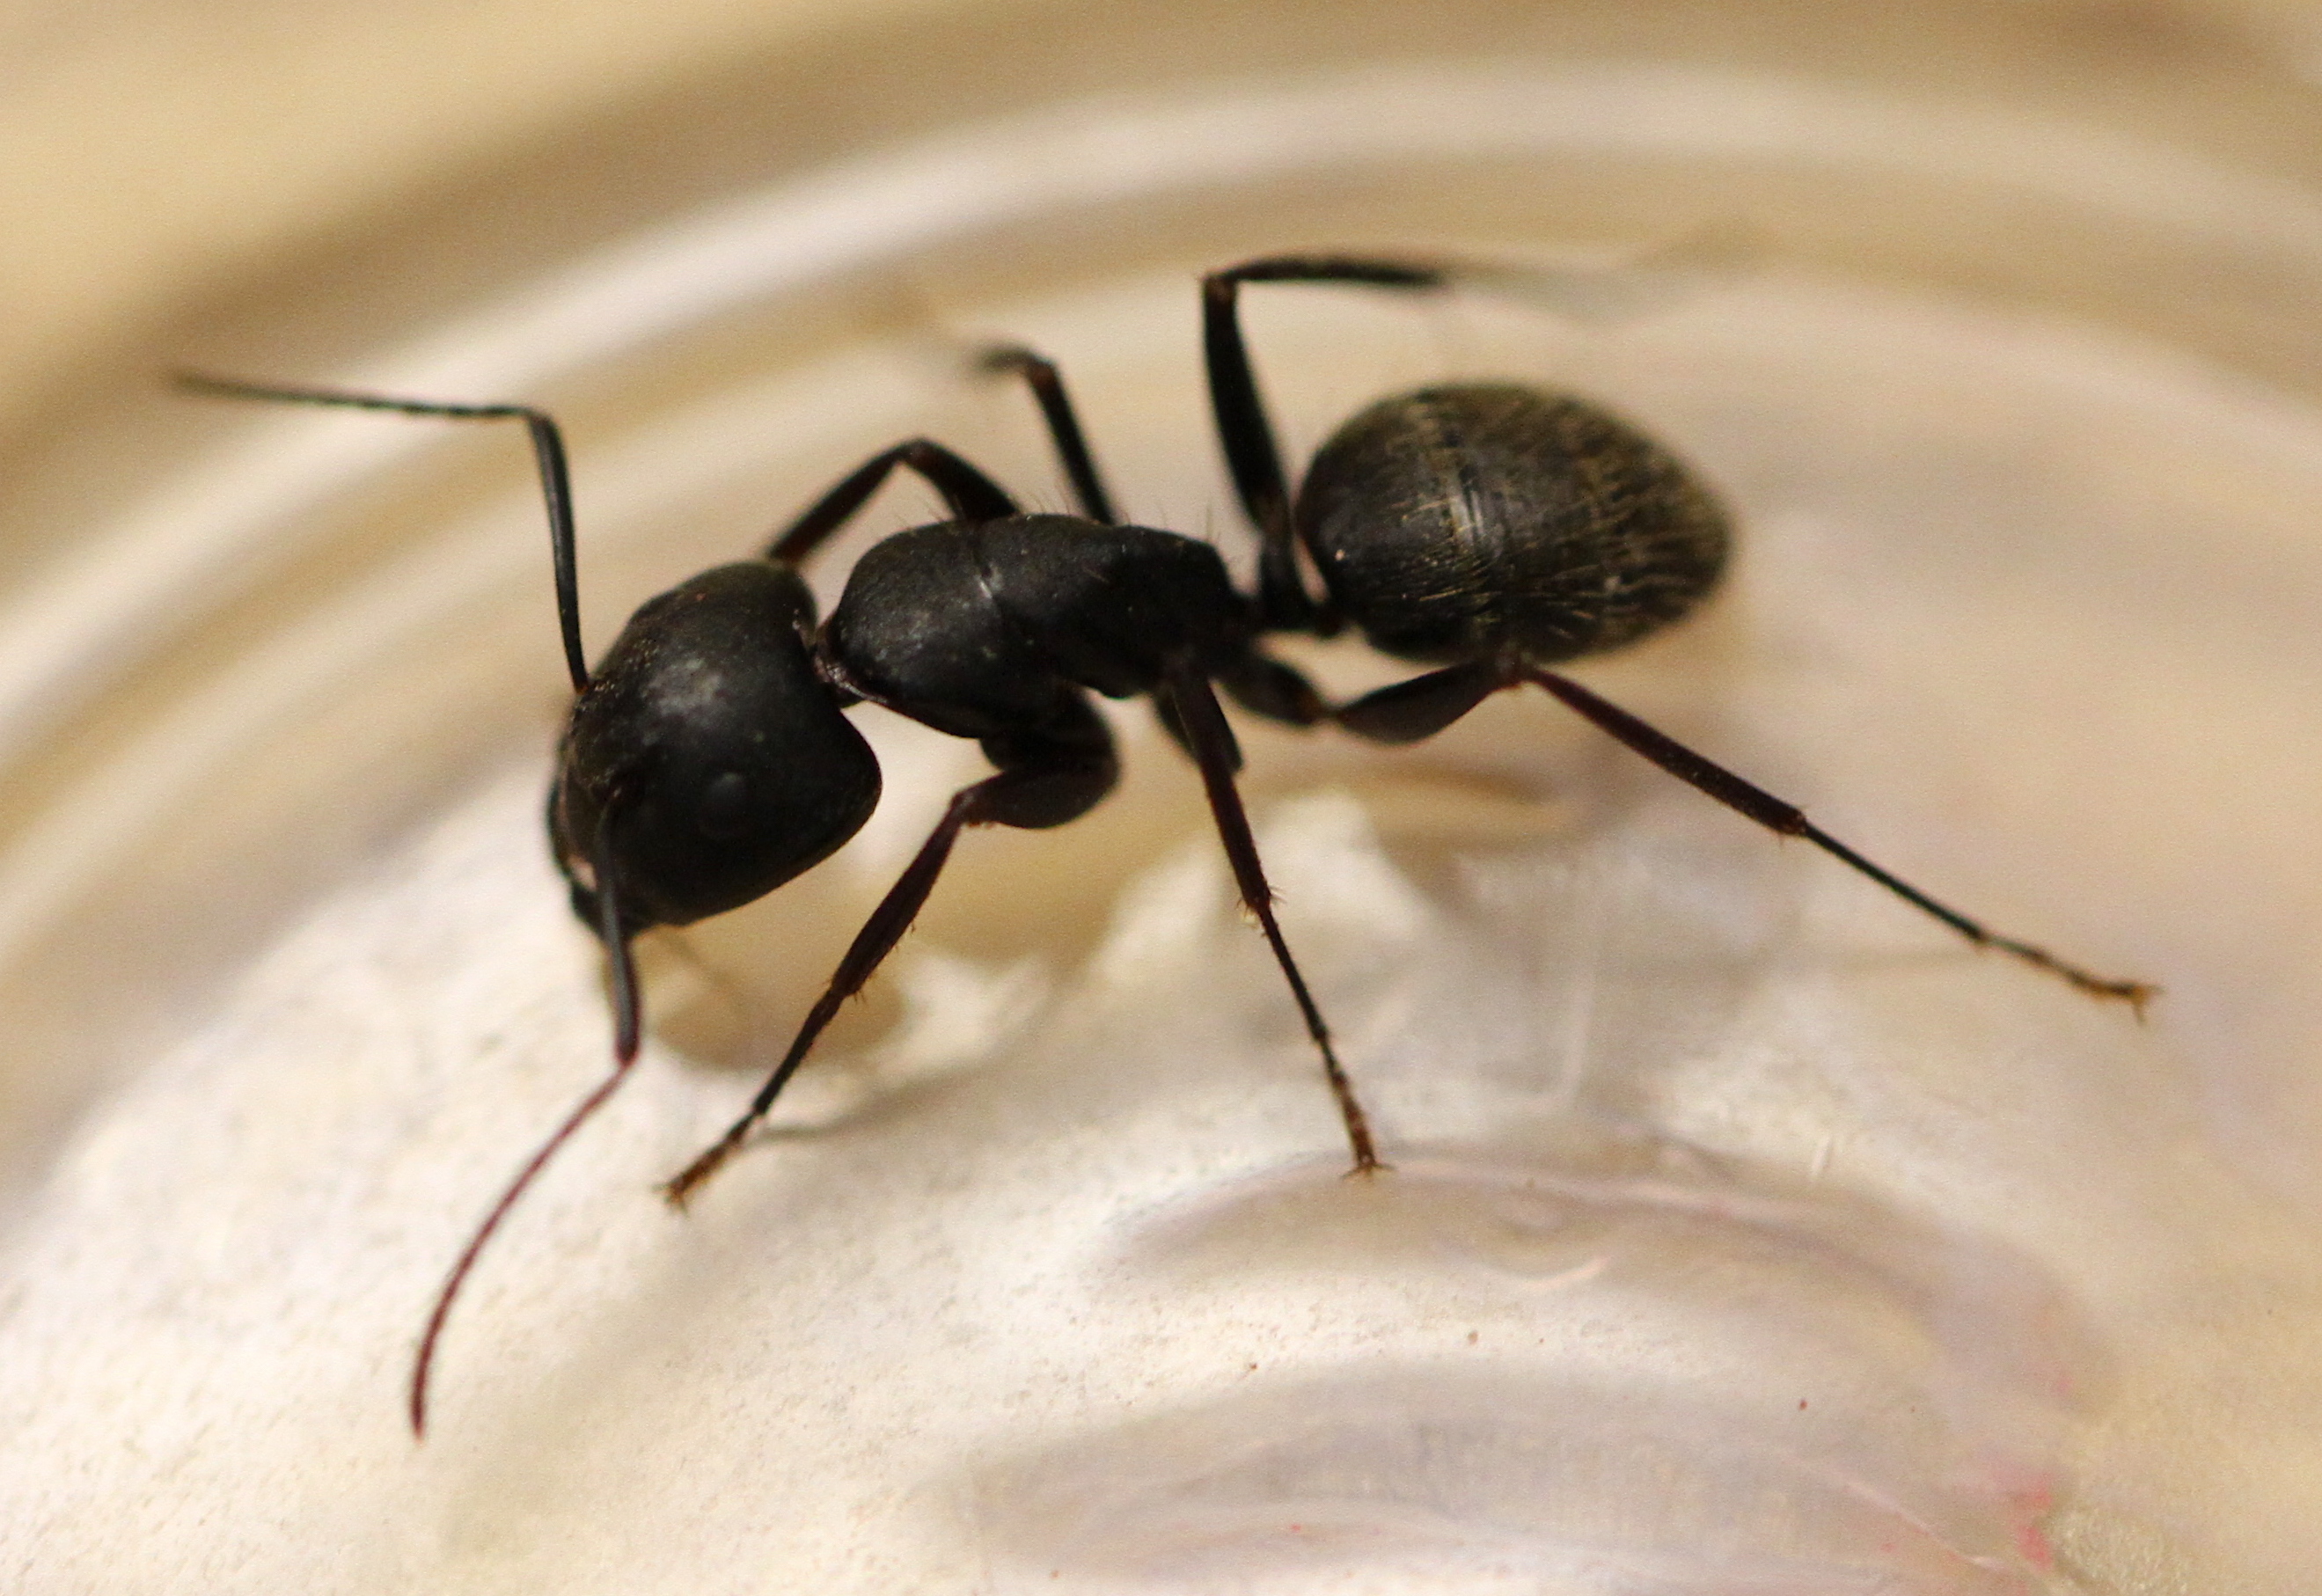 Top view of a black colored ant inside of a clear plastic container.